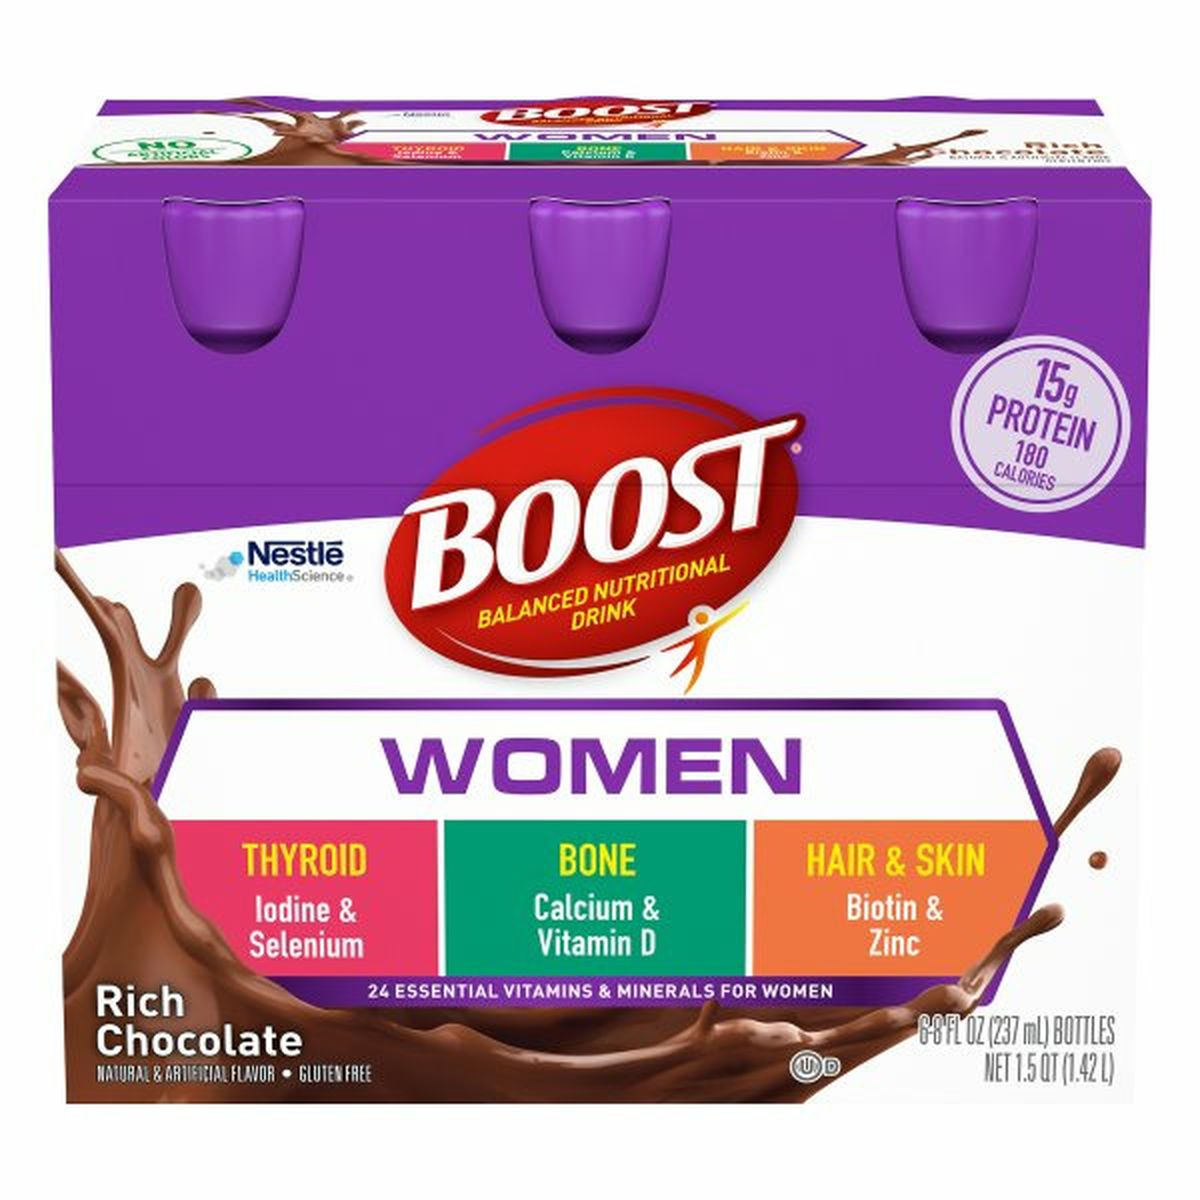 Calories in Boost Nutritional Drink, Rich Chocolate, Balanced, Women